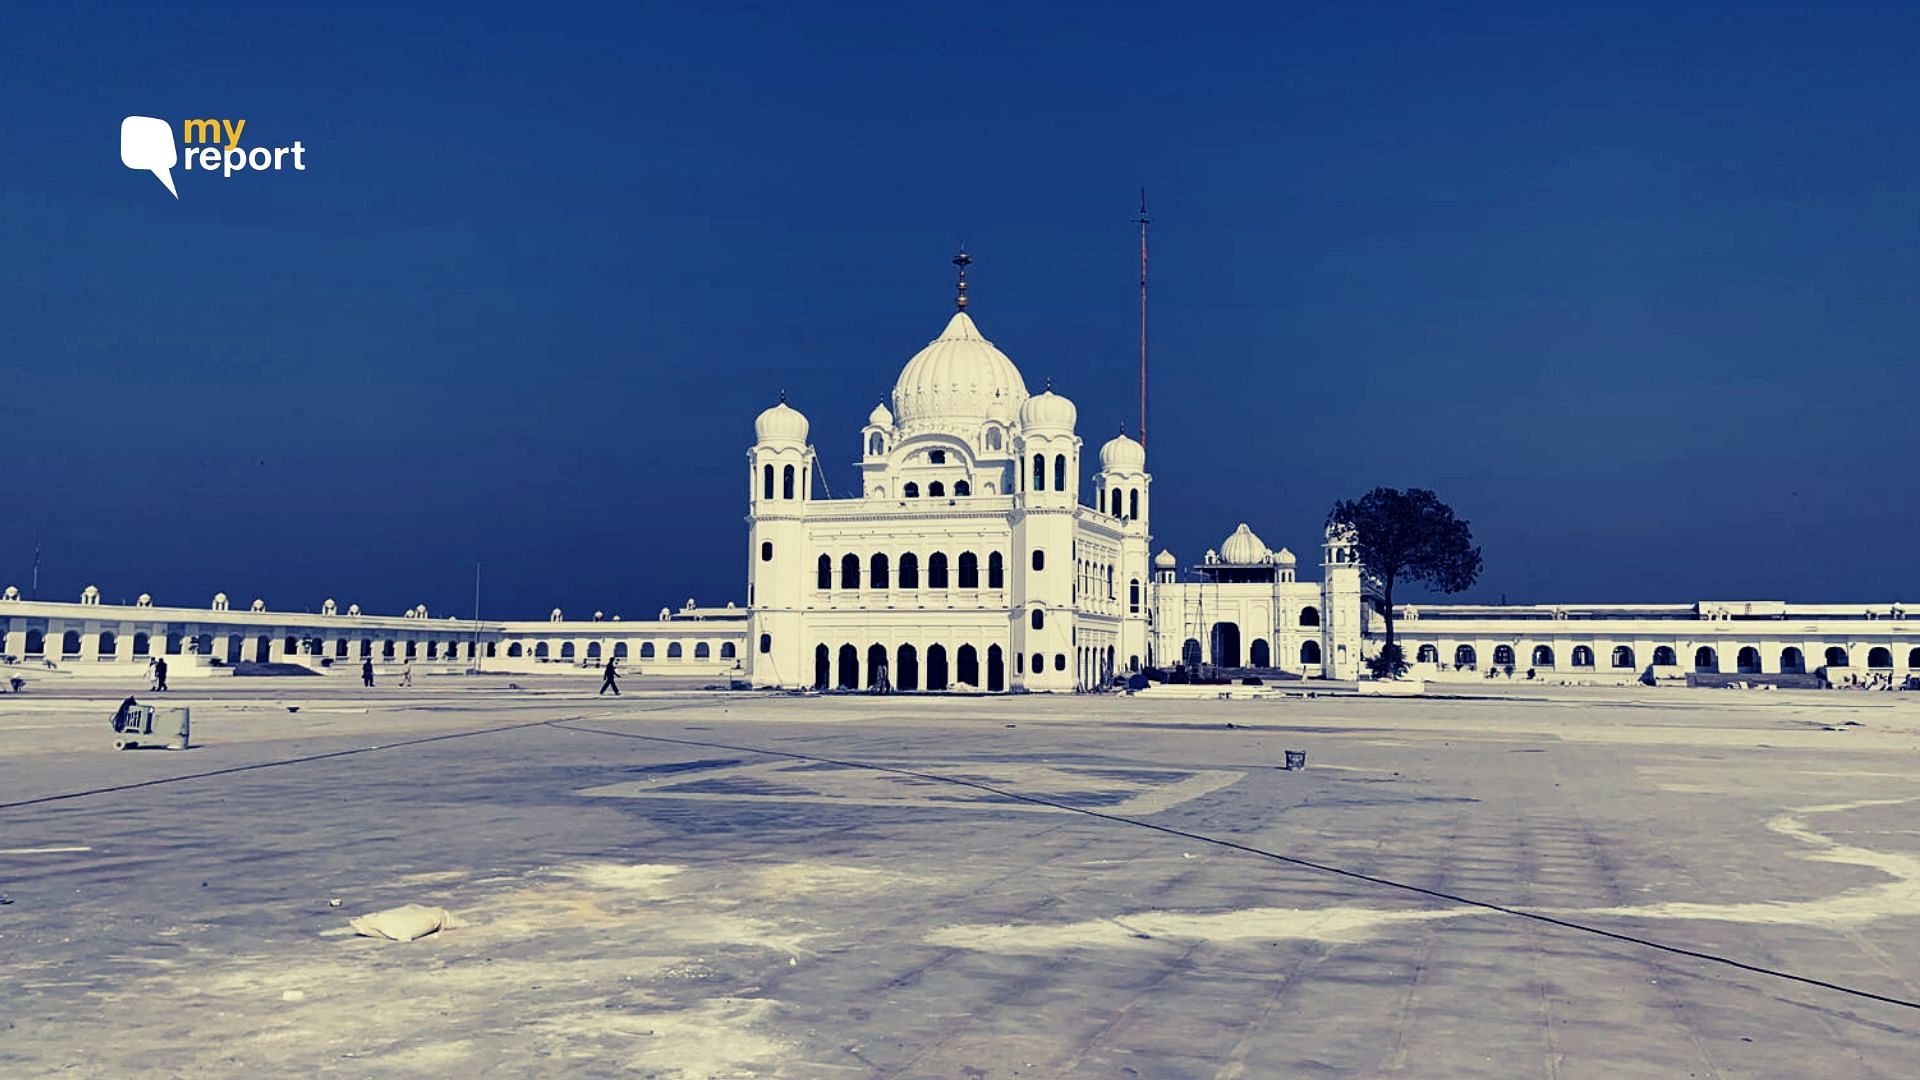 Here’s a first look at Kartarpur gurdwara before it open to Indian pilgrims.